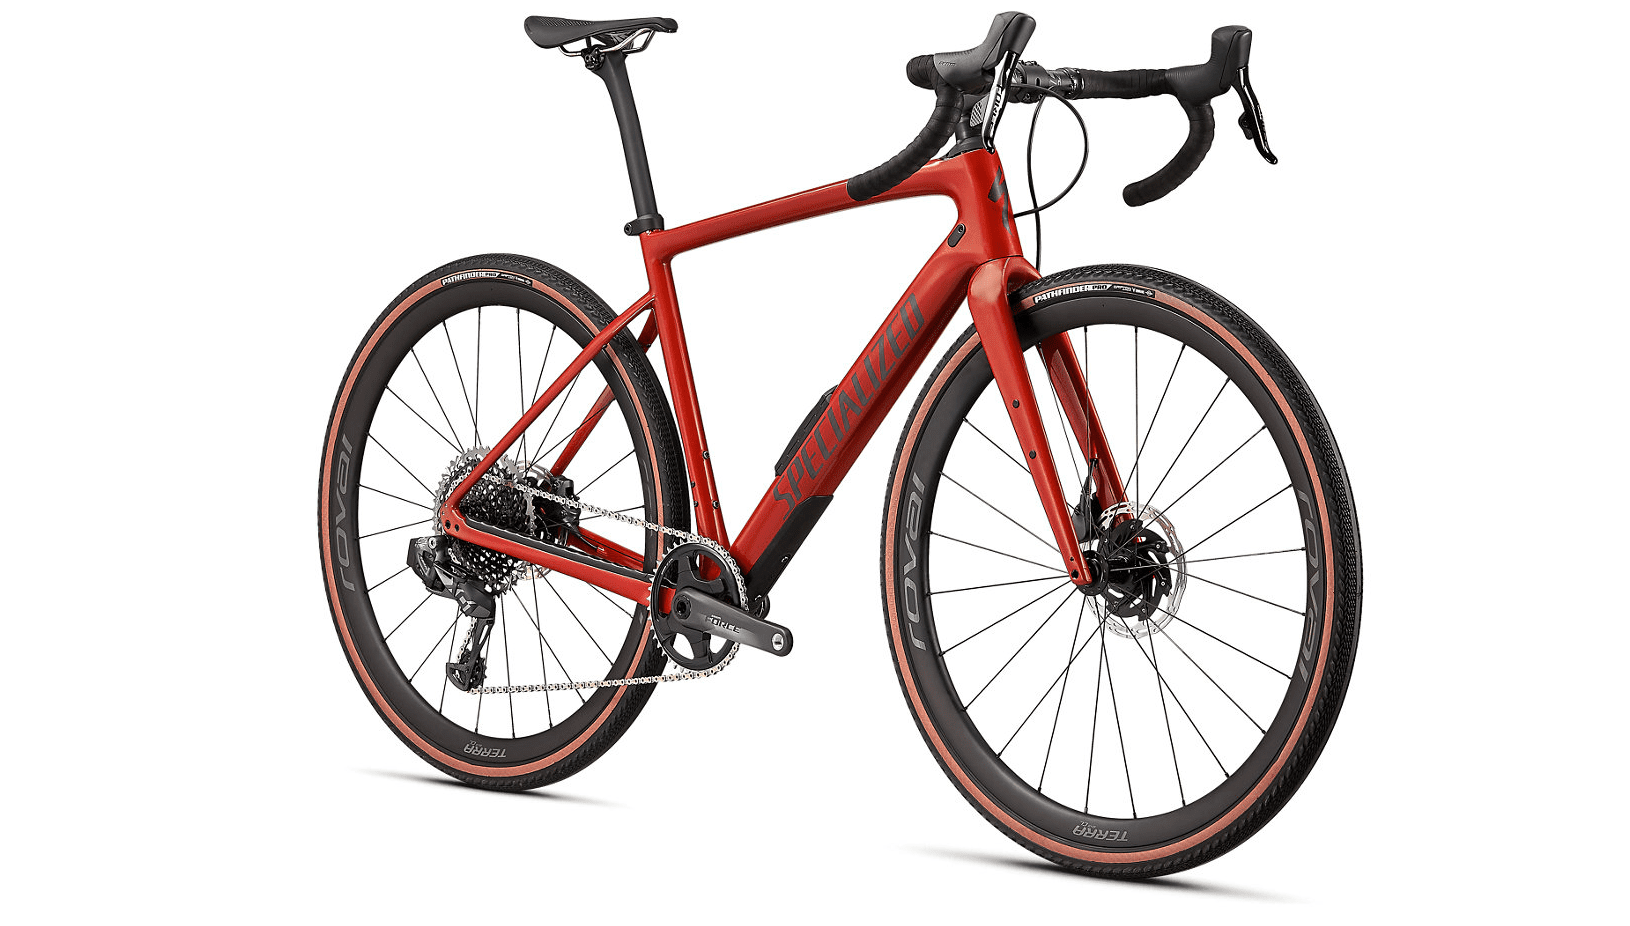 Specialized Diverge Pro Carbon 2021 Seitenansicht in der Farbe Gloss Redwood/Smoke/Chrome/Clean